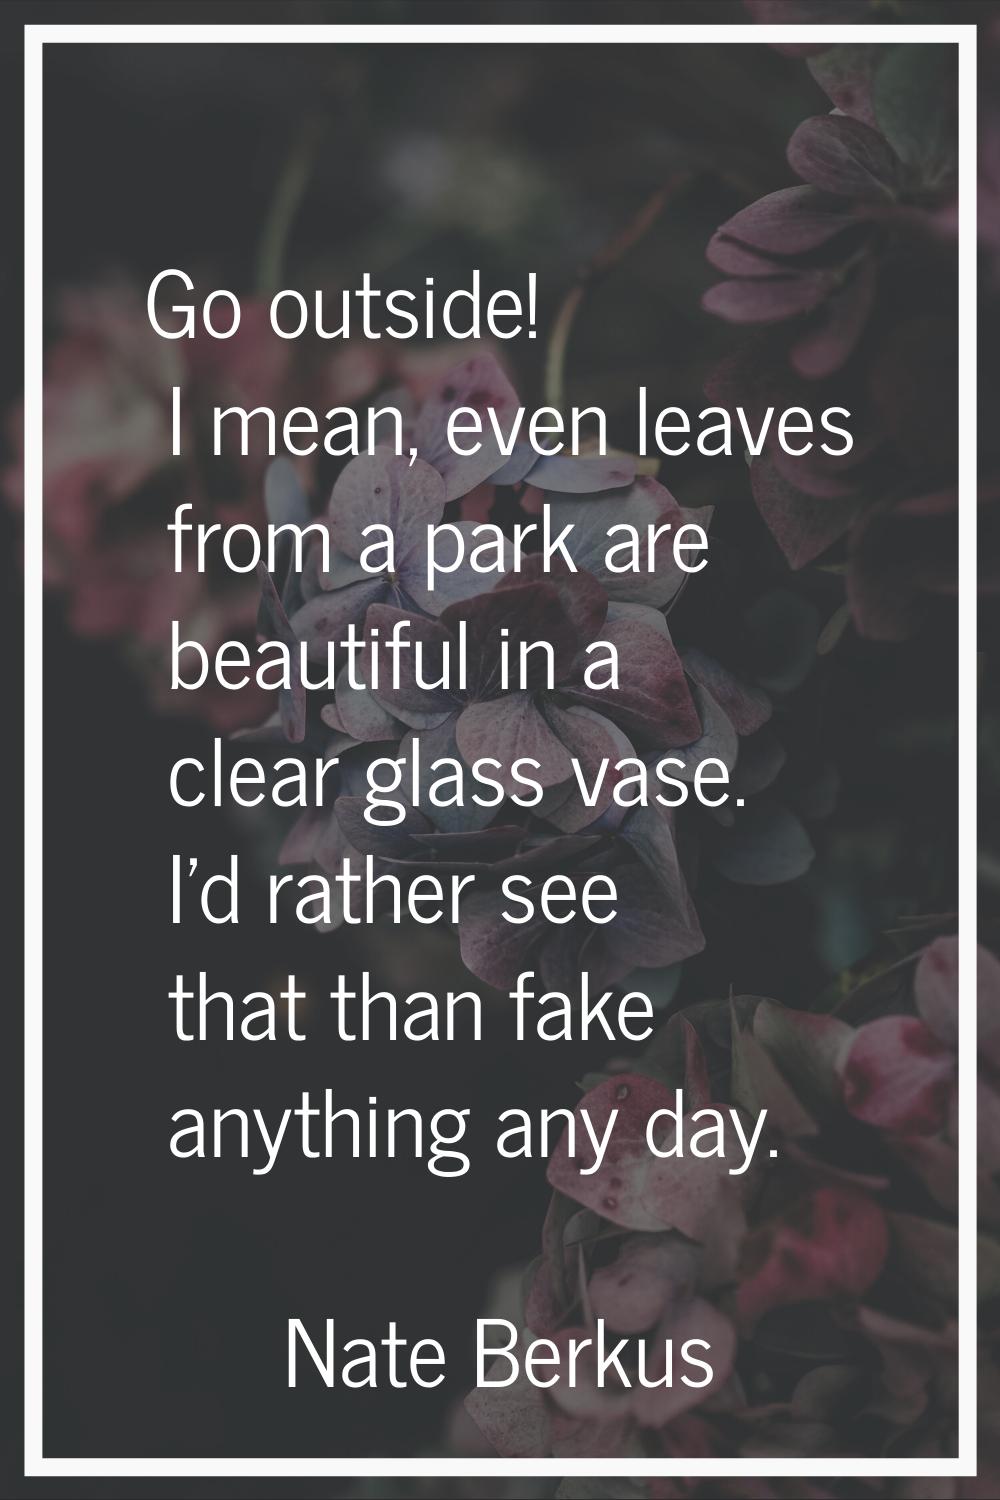 Go outside! I mean, even leaves from a park are beautiful in a clear glass vase. I'd rather see tha